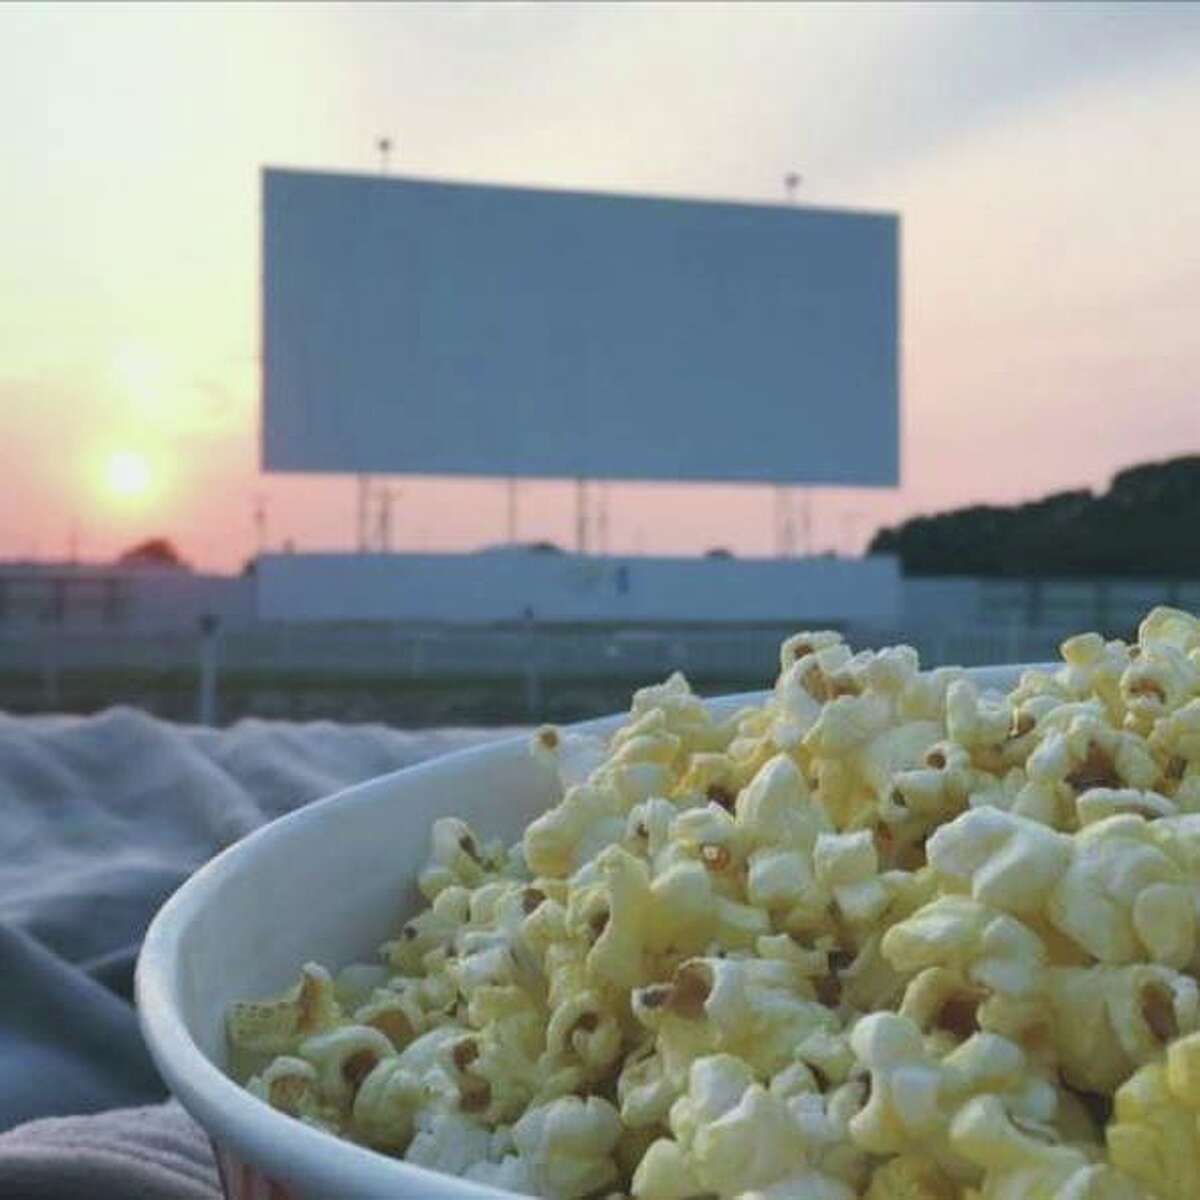 Litchfield ones: Litchfield Skyview Drive-In is located on Route 66 in Litchfield. Tickets to Litchfield Skyview are $7 per person, kids 5 and under are free.